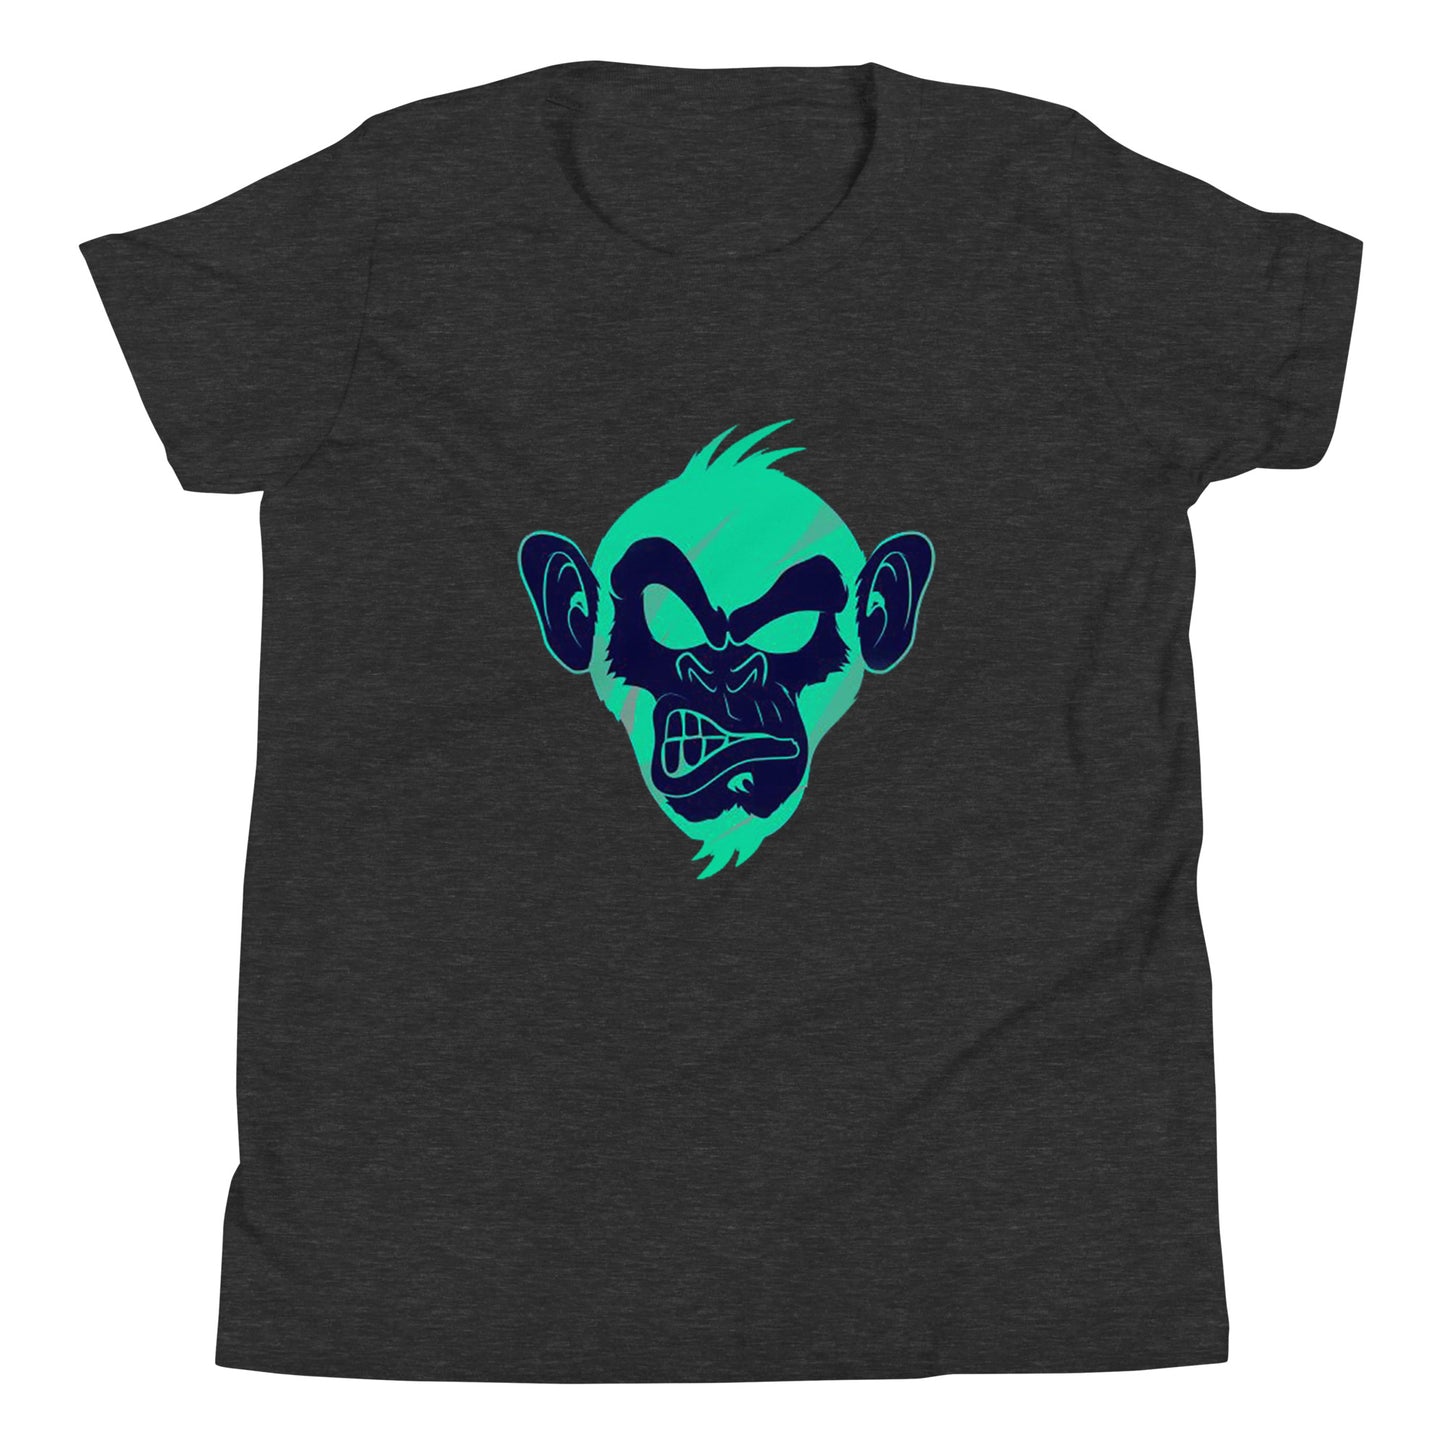 Dark grey T-shirt with print of a Cool monkey in black light green